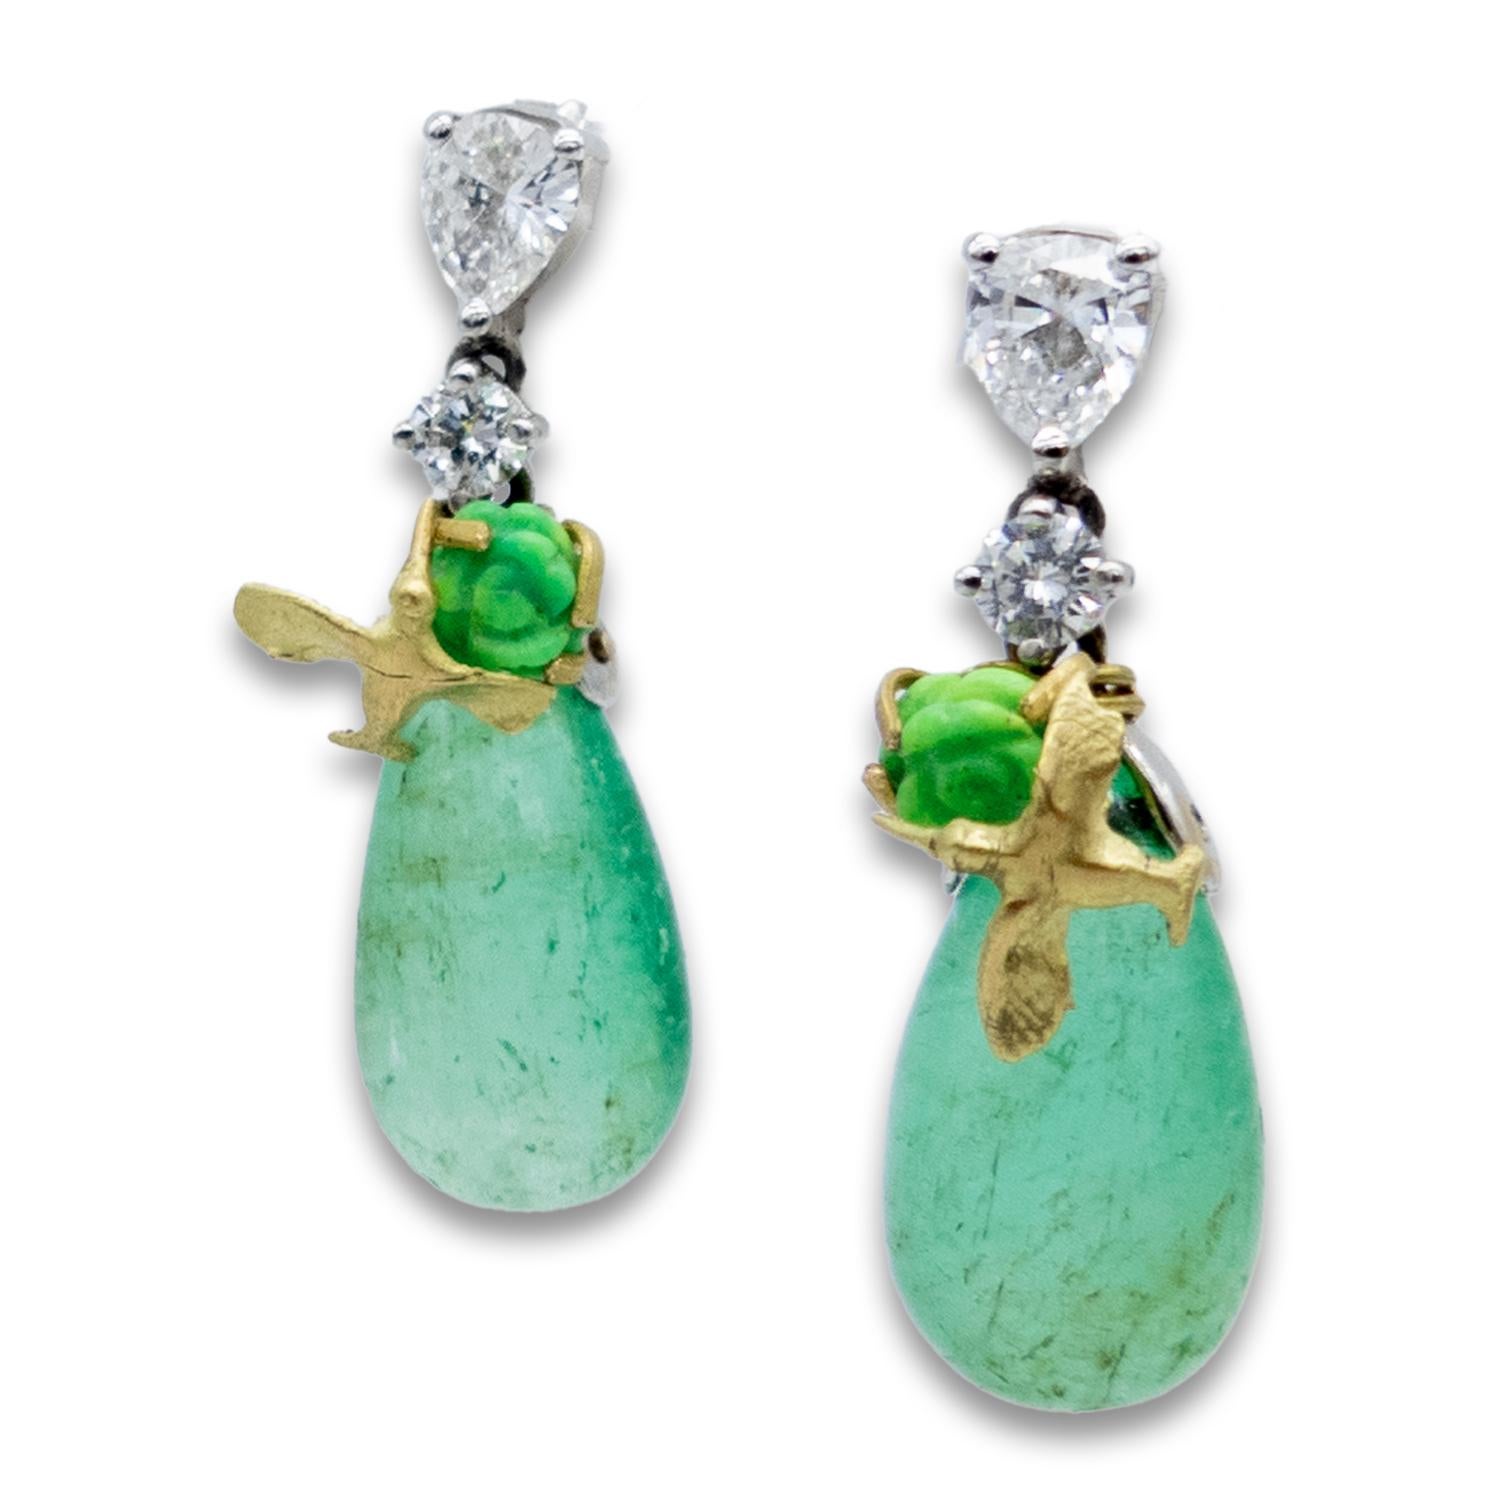 21st Century Emeralds Diamonds Pear Cut Turquoise Yellow & White Gold Earrings

Earrings in white gold and 18 Karat yellow gold, 0'71 carats of pear-cut diamonds, 0'25 carats of brilliant-cut diamonds and 18 carats of drop emeralds and rose cut